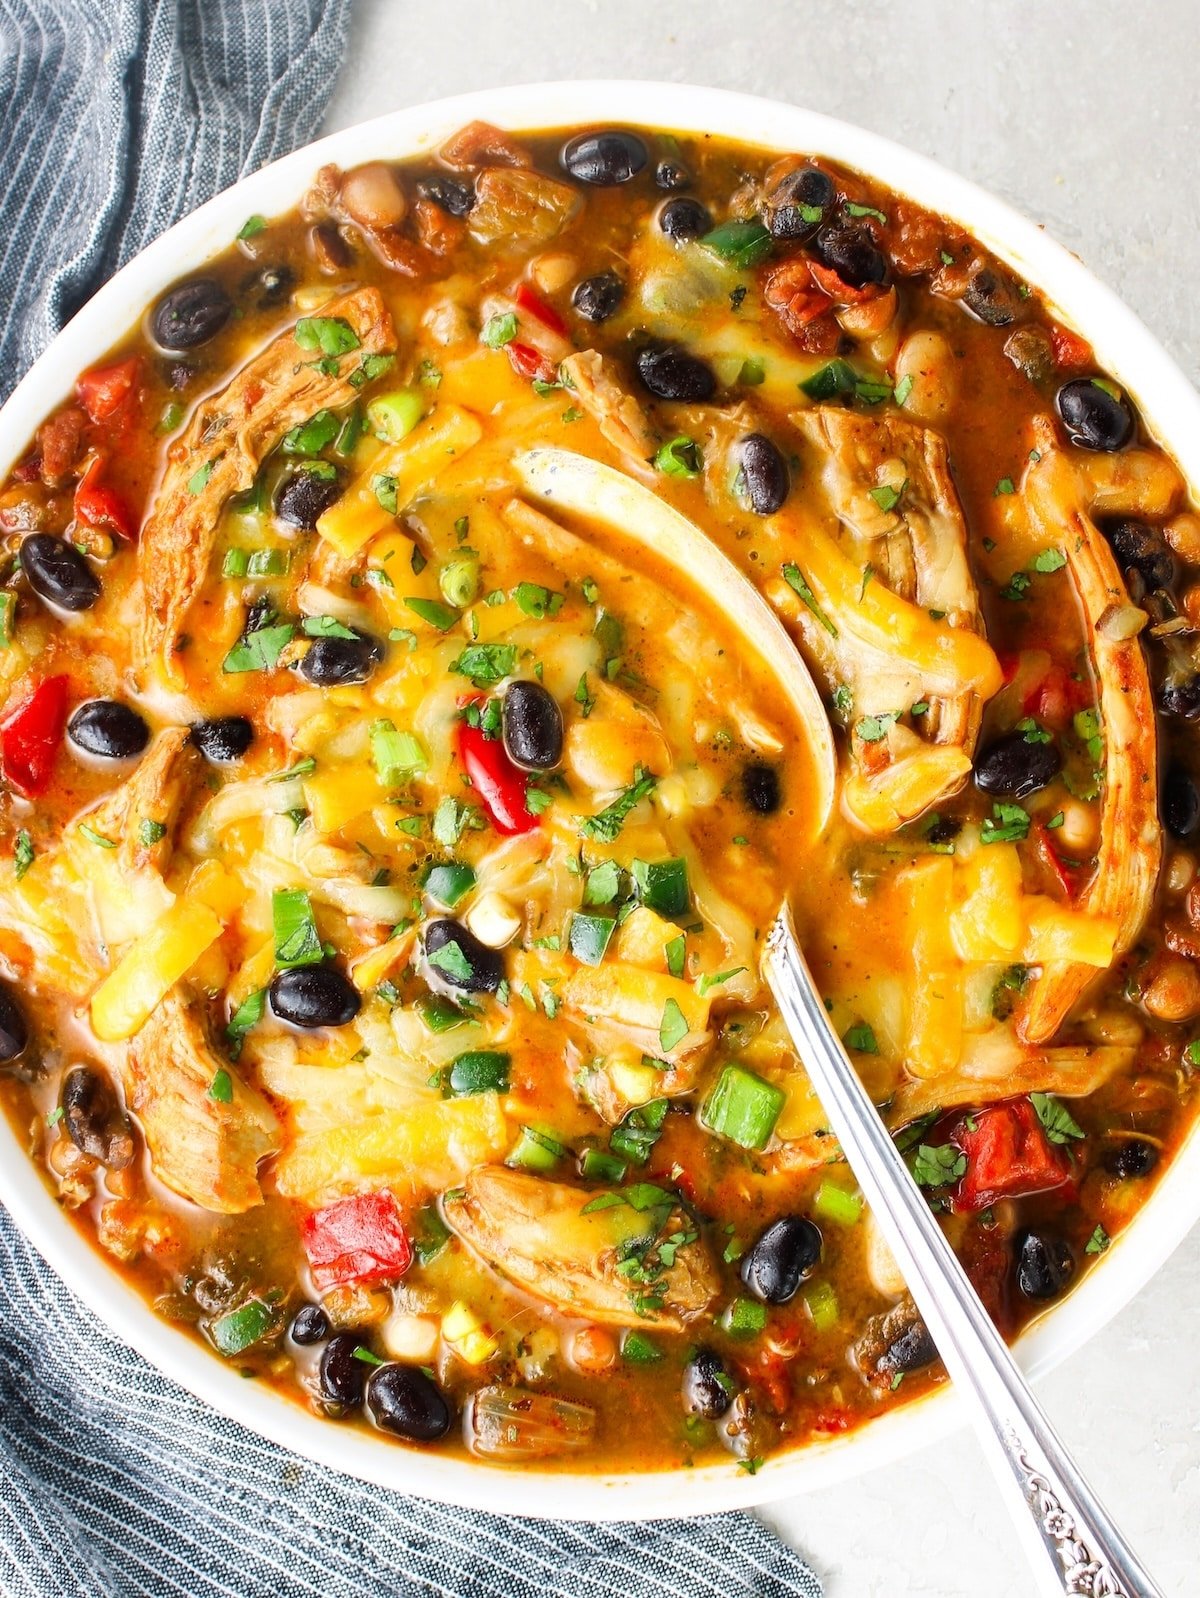 A bowl of Mexican flavored soup with toppings added.